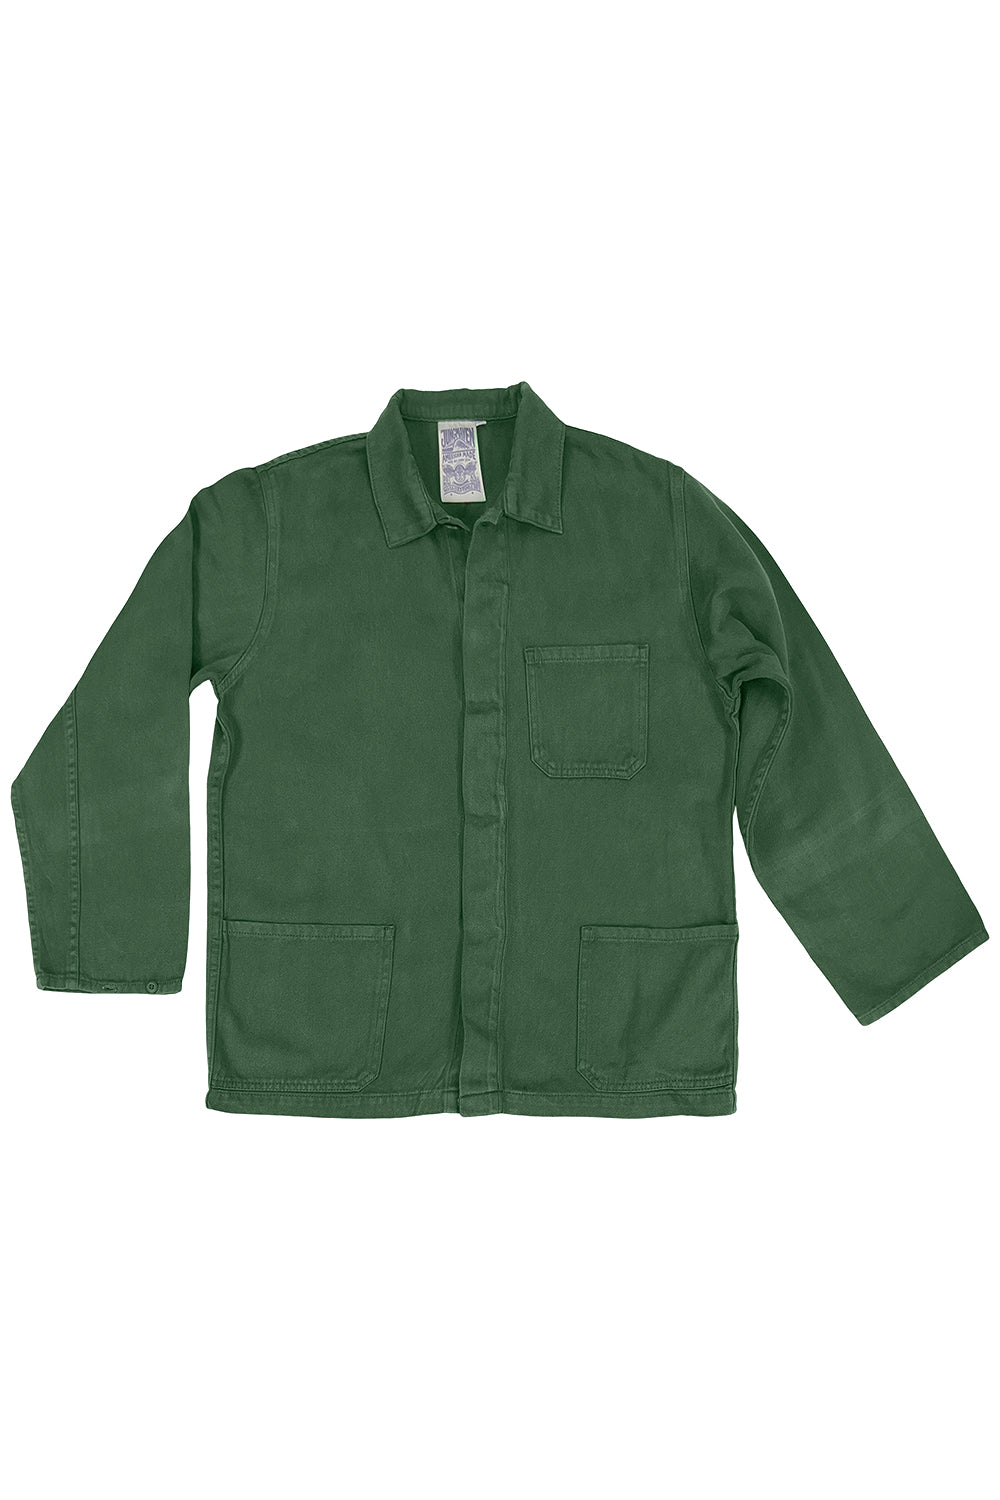 Olympic Jacket | Jungmaven Hemp Clothing & Accessories / Color: Hunter Green